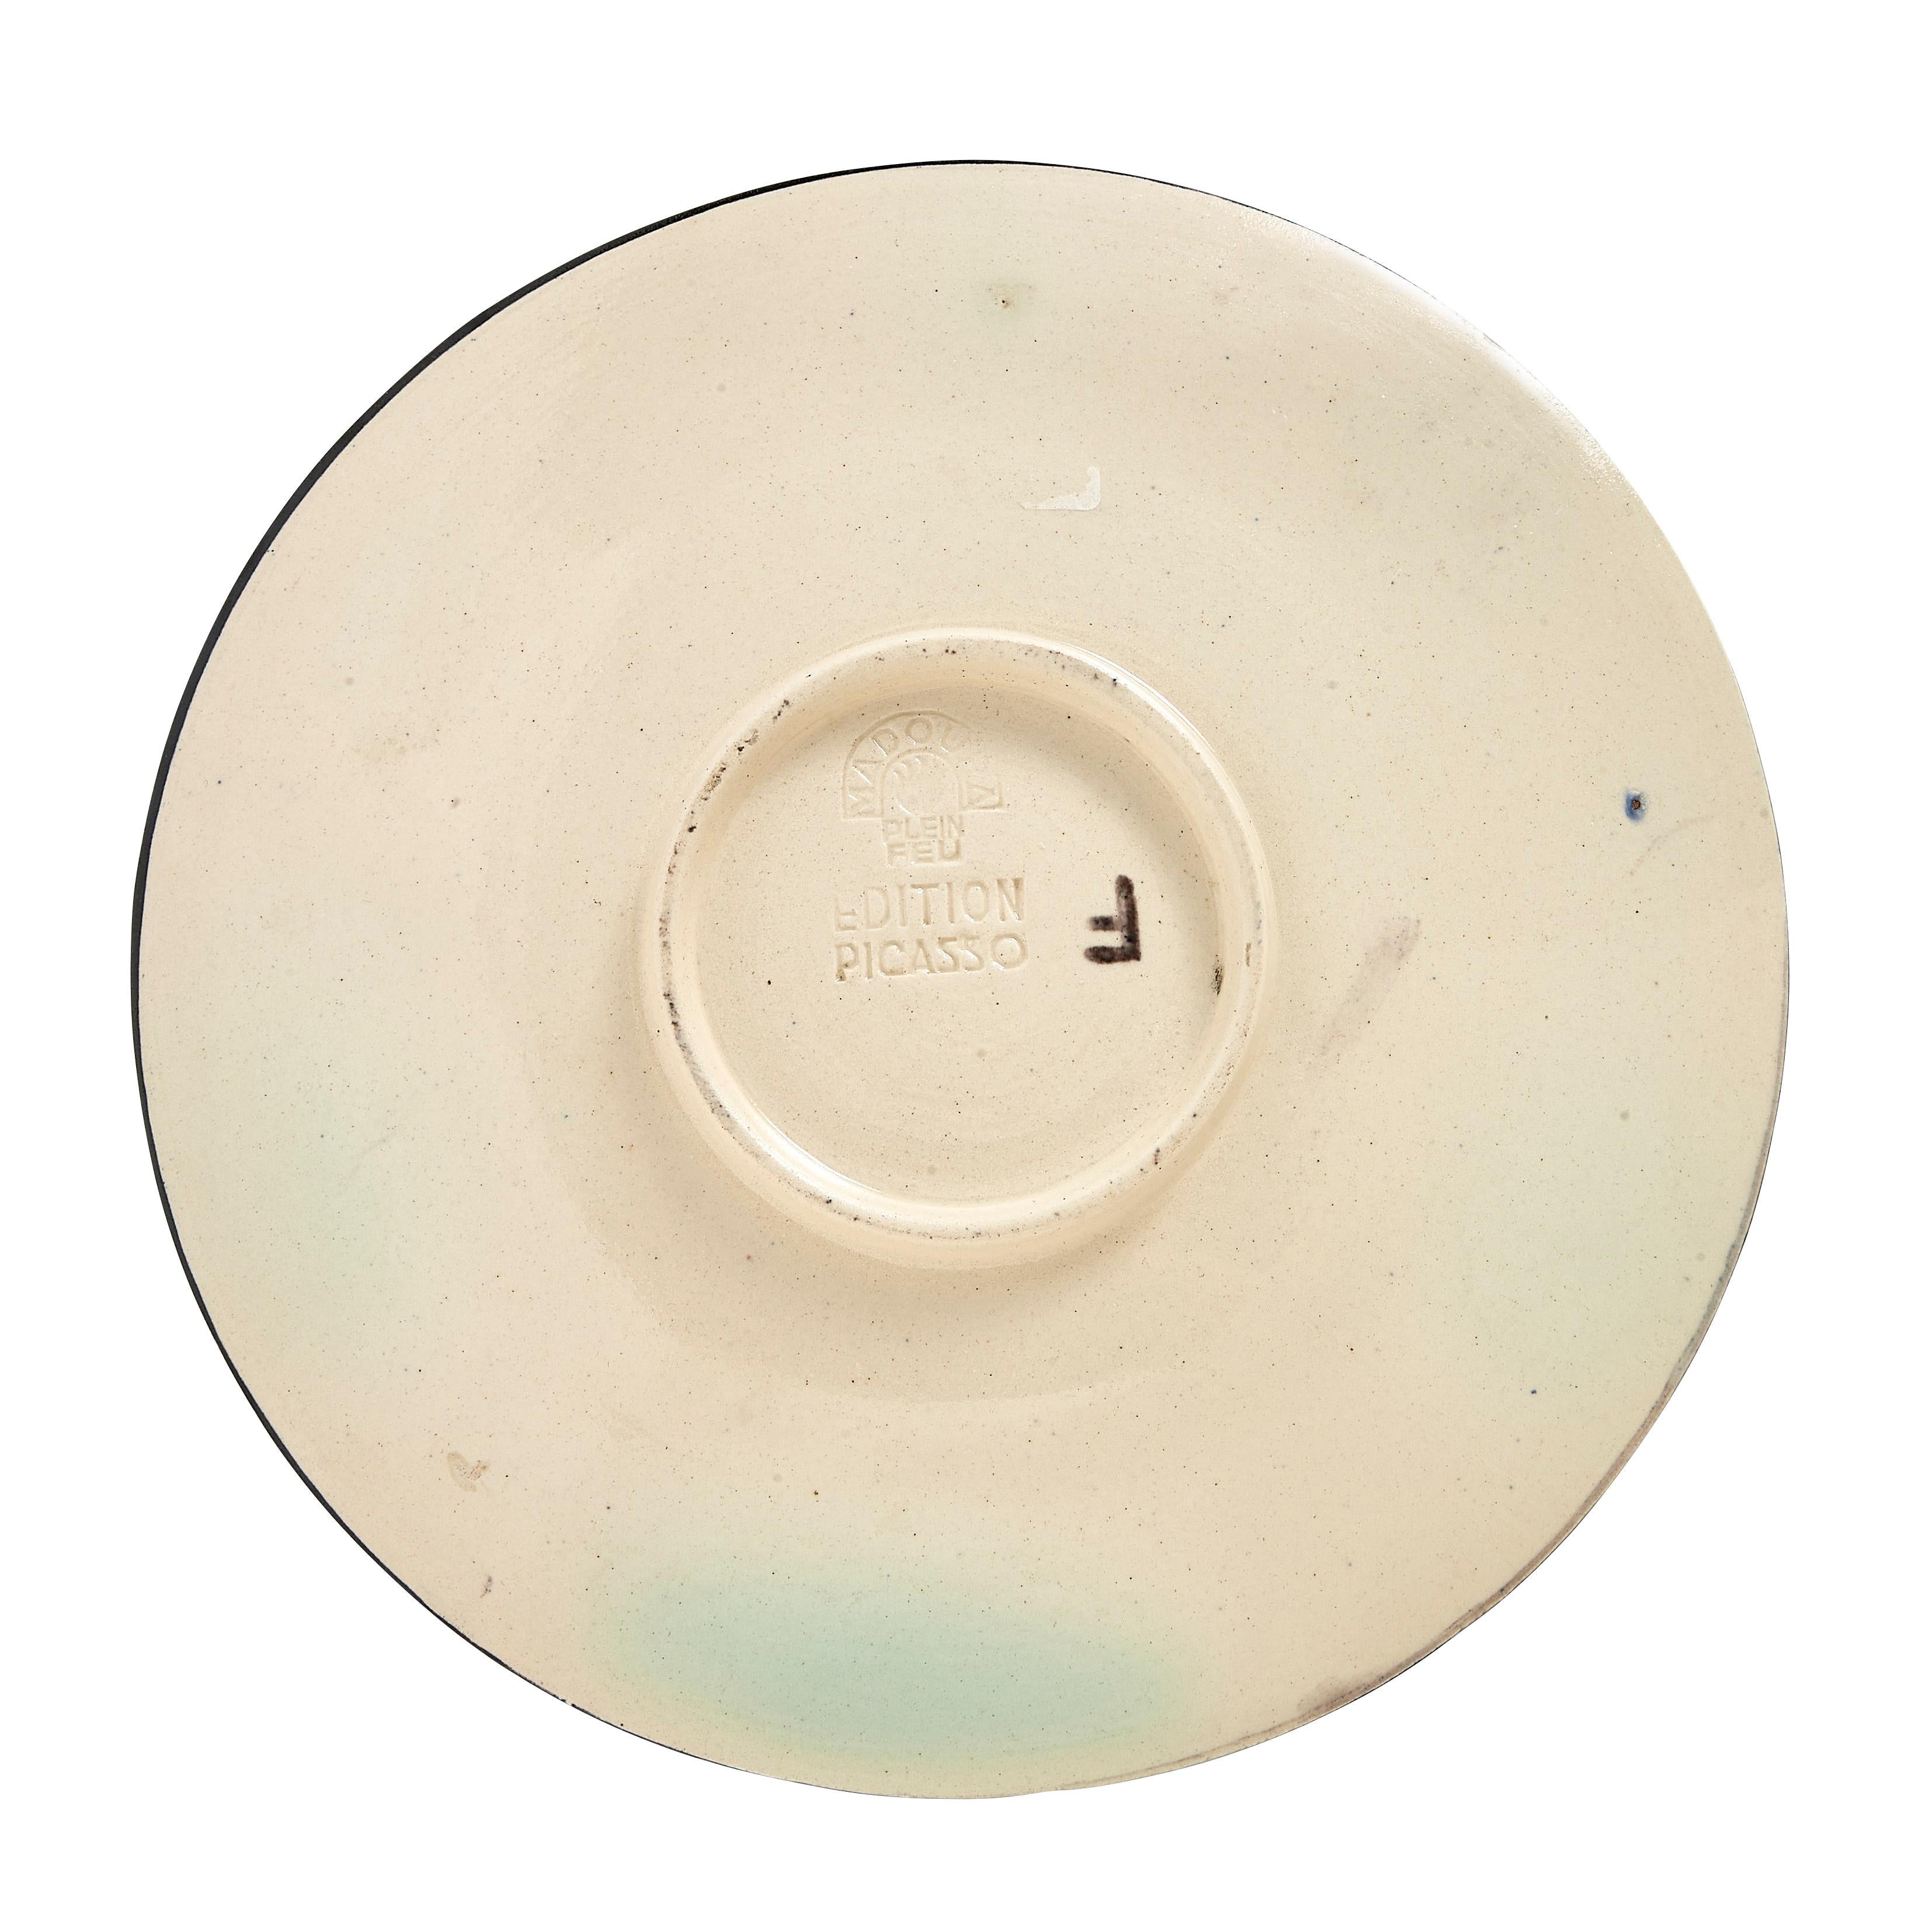 PABLO PICASSO (1881-1973) 
Service visage noir (A. R. 41)

Terre de faïence plate, painted in colors and glazed, 1948, from the edition of 100, inscribed 'F', 'd'après Picasso' and 'Madoura', with the Madoura stamp.